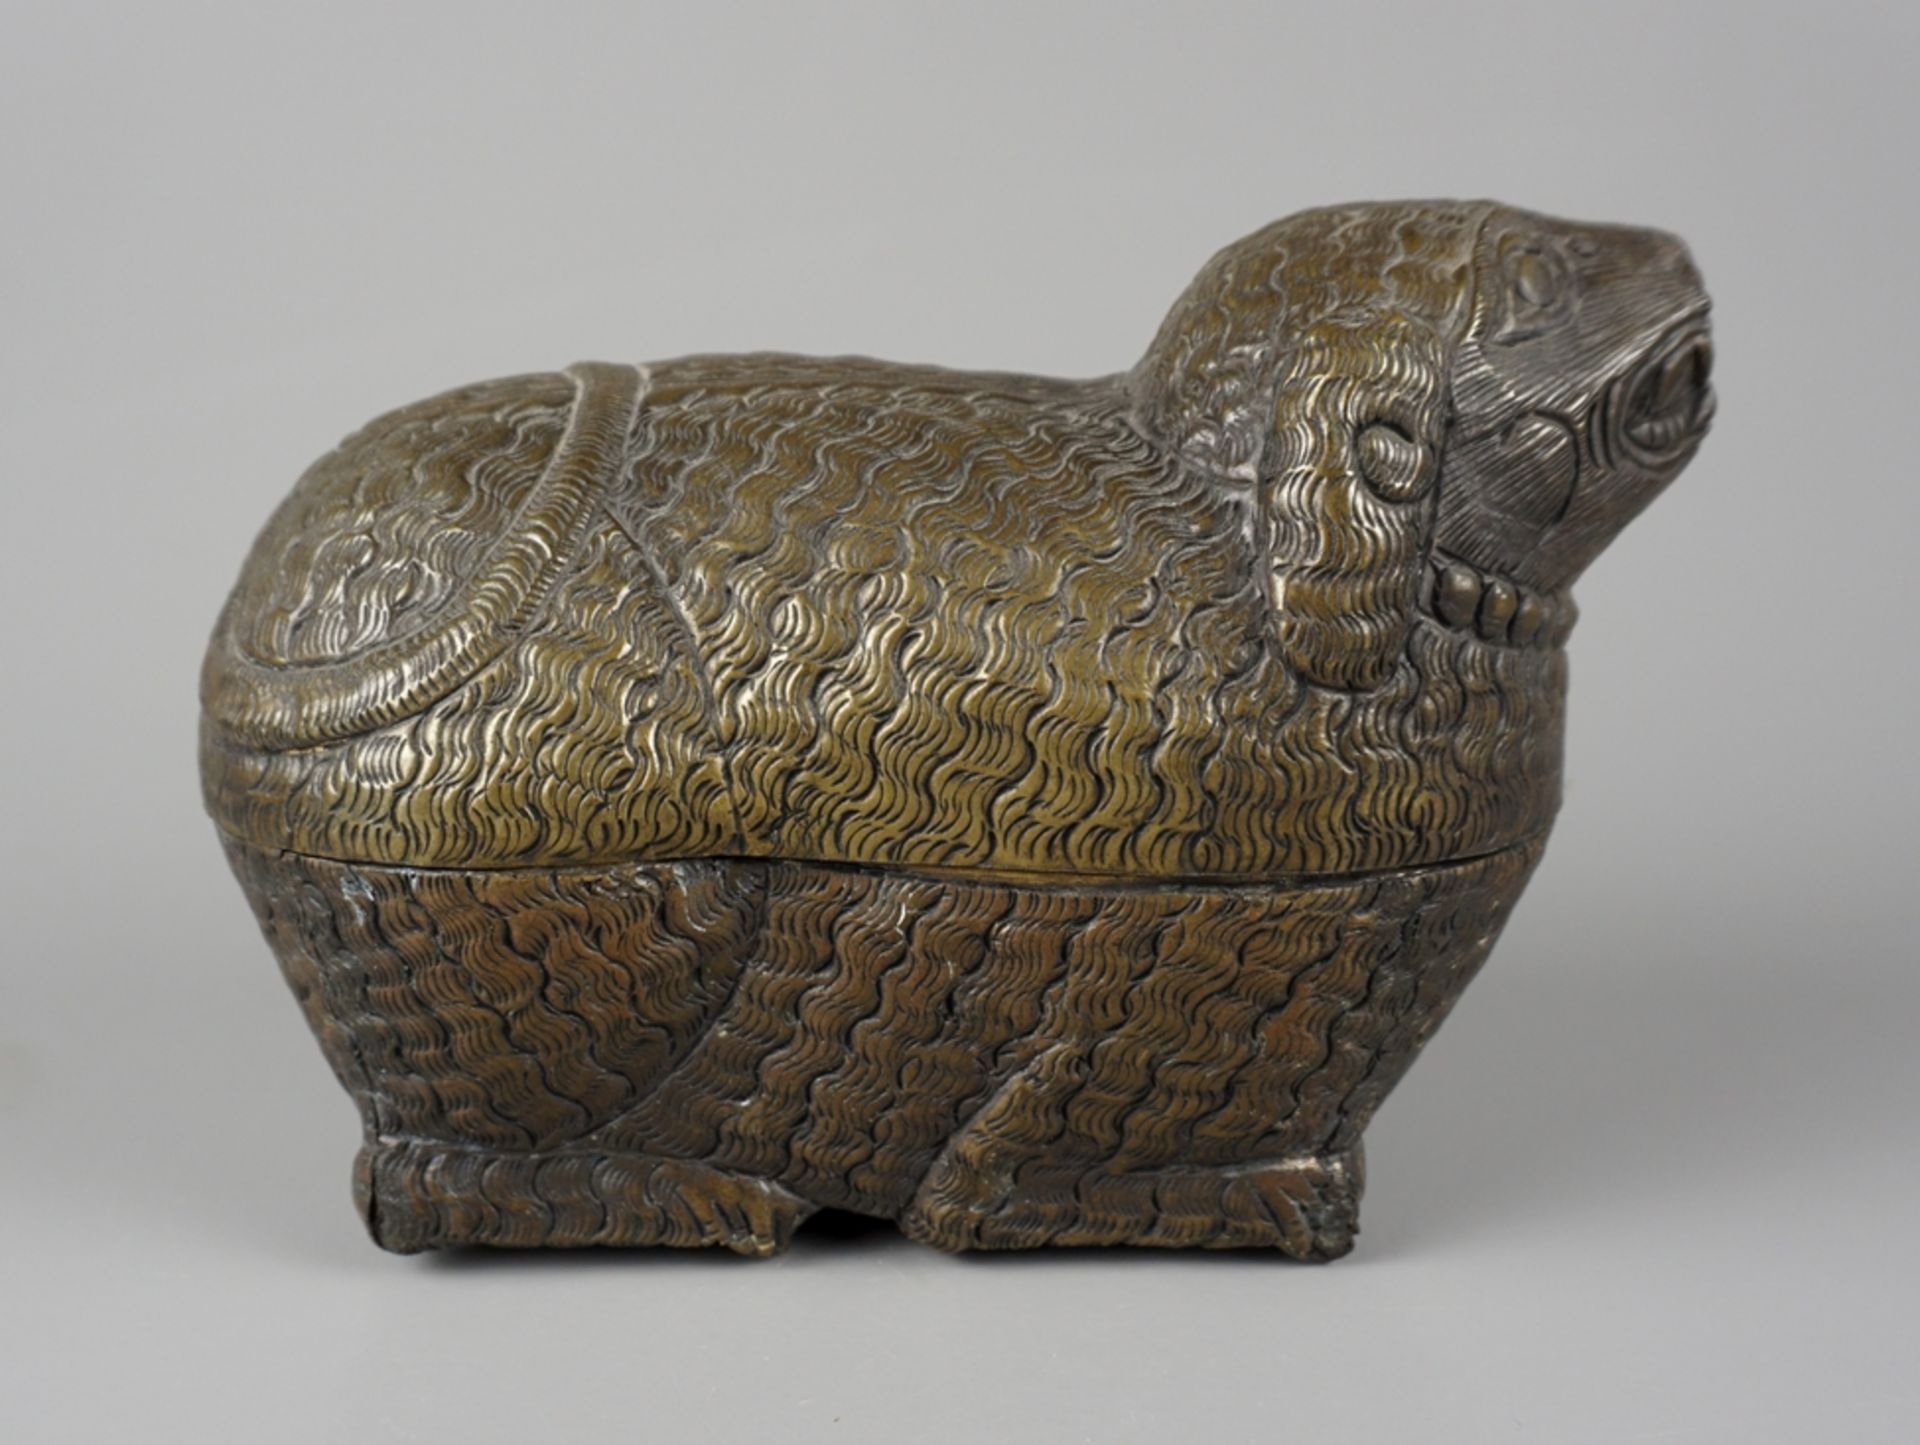 Figural betel nut box in the shape of a sheep, Cambodia